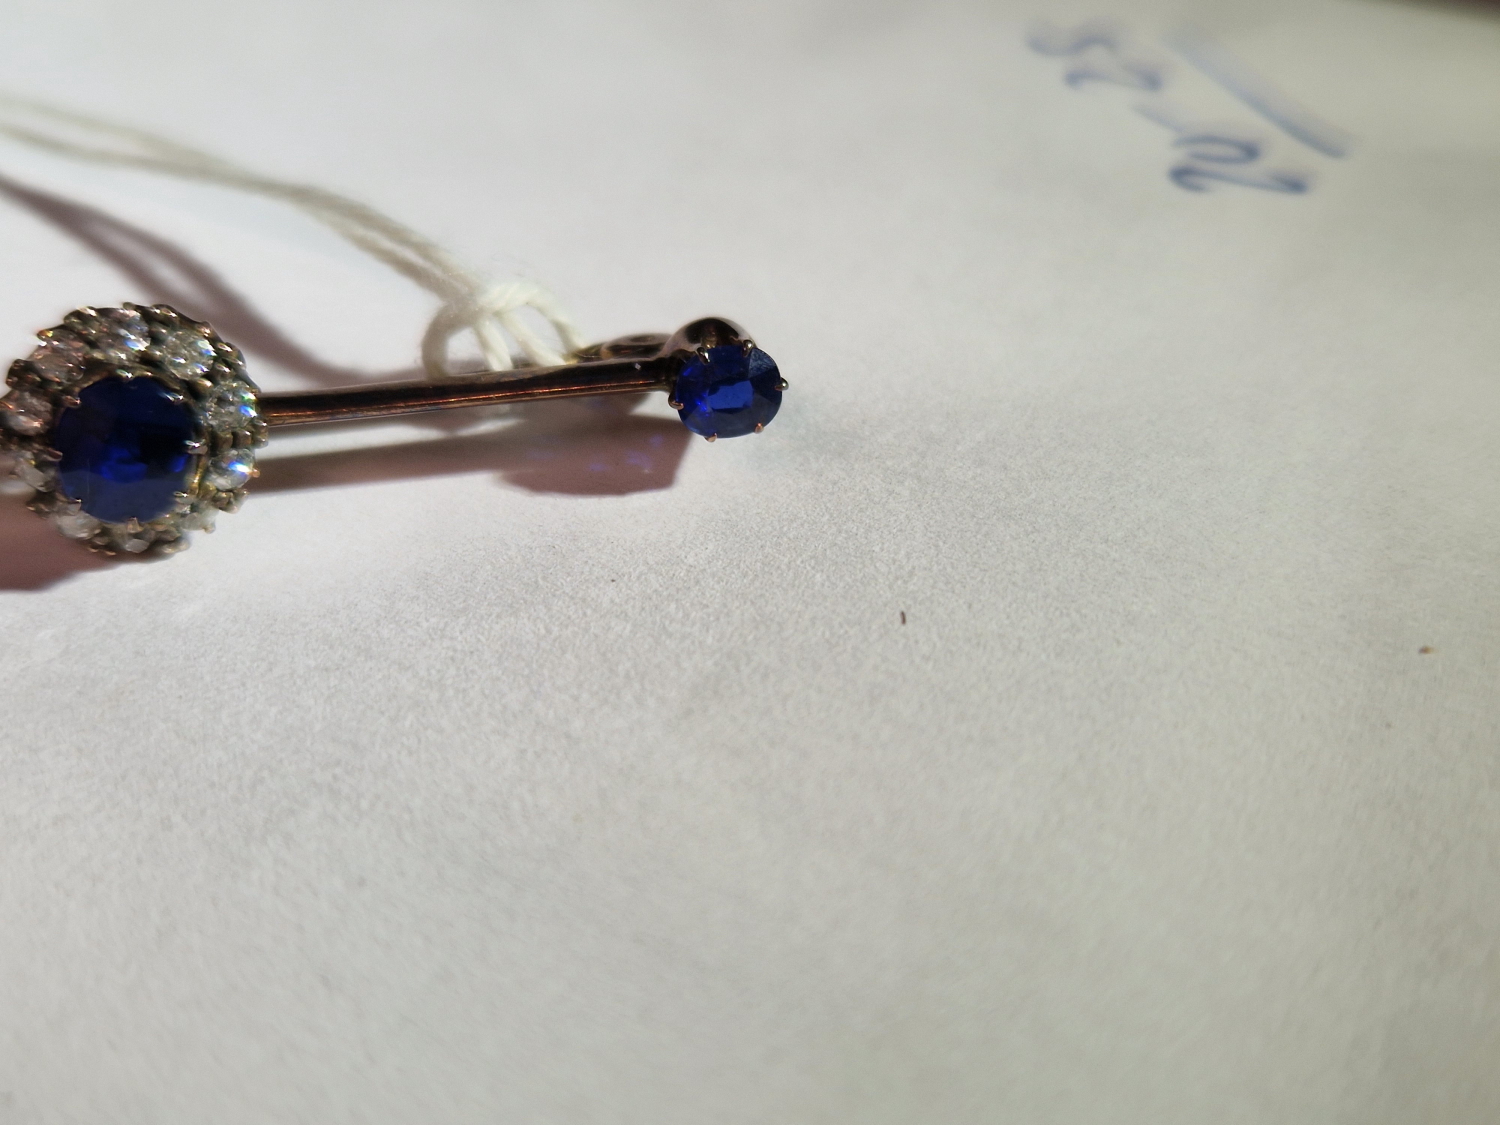 AN ANTIQUE SAPPHIRE AND DIAMOND BRA BROOCH. UNHALLMARKED, ASSESSED AS 9ct GOLD. LENGTH 4.6cms. - Image 7 of 7